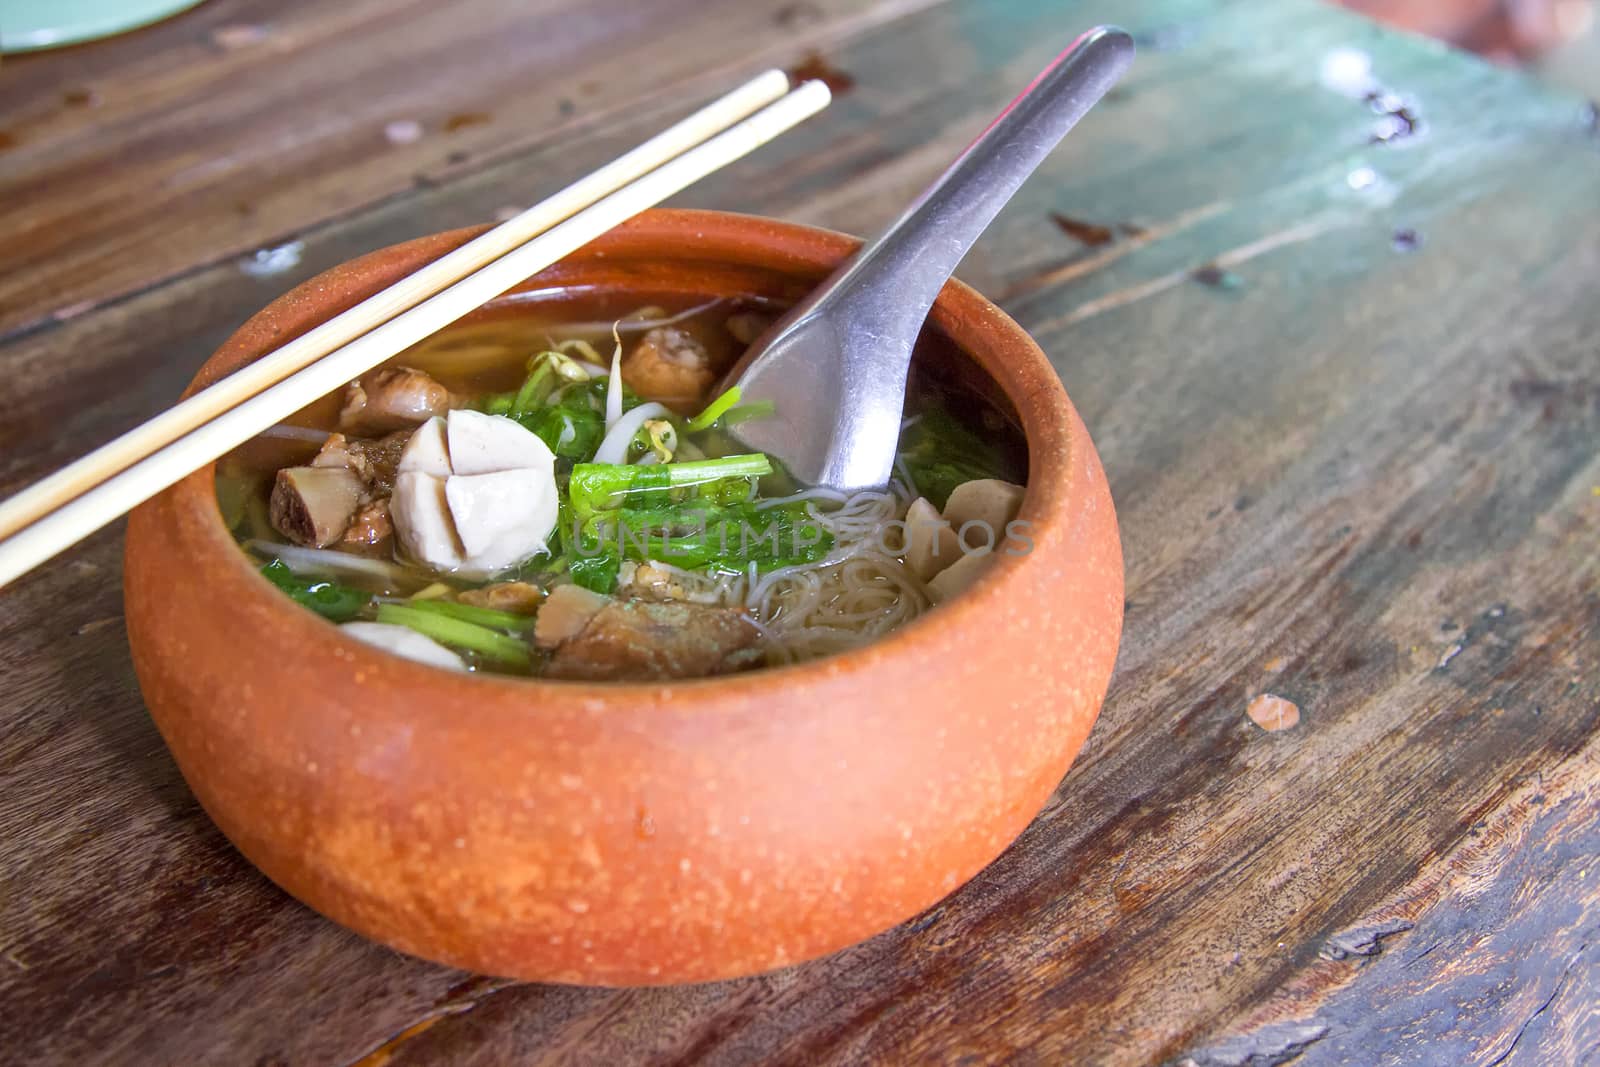 Clay pot rice noodles put on a wooden table by TakerWalker